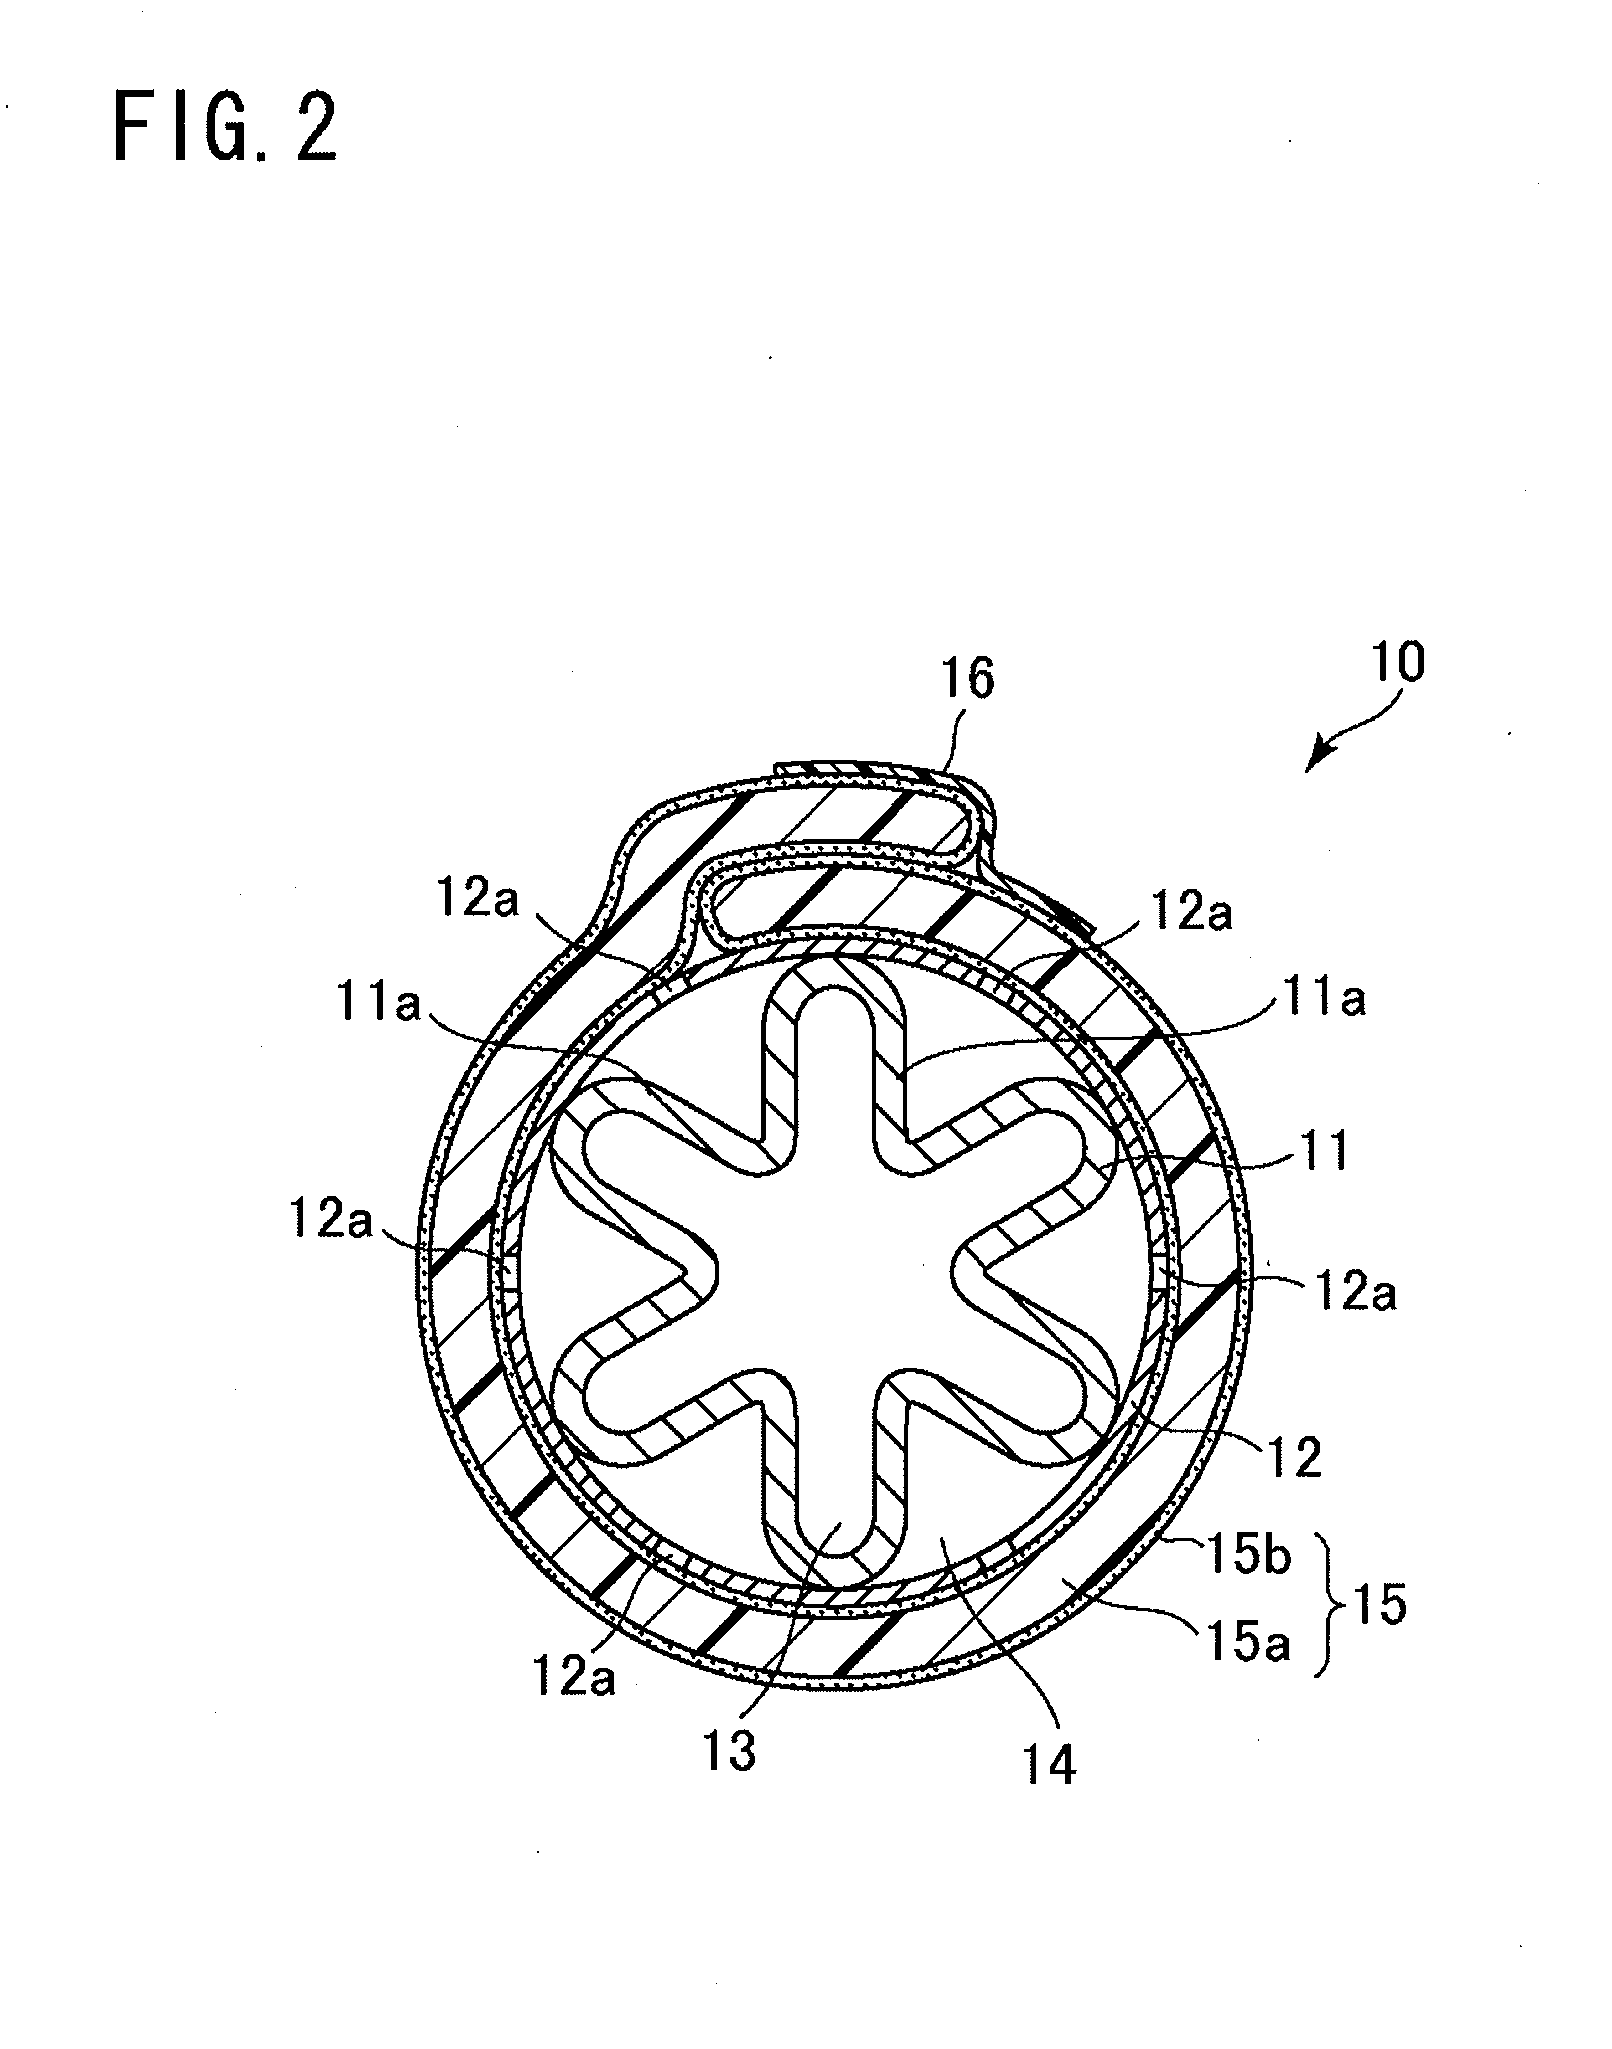 Cooling device for use in space environment